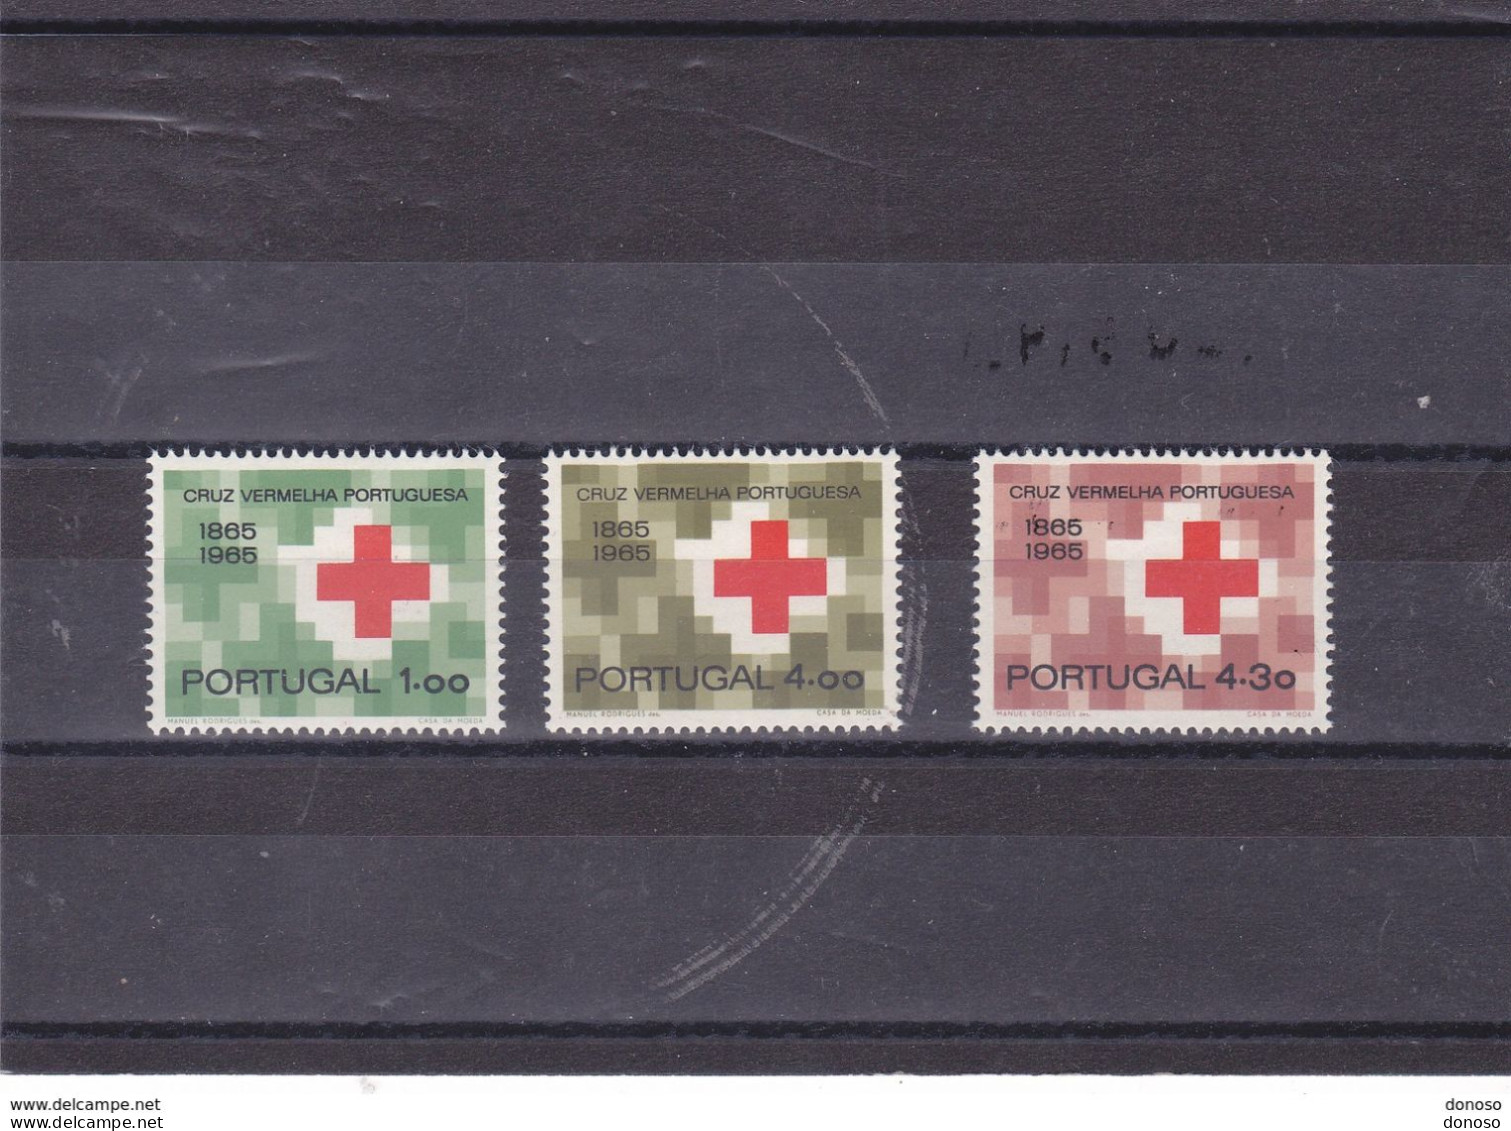 PORTUGAL 1965 CROIX ROUGE Yvert 968-970, Michel 987-989 NEUF** MNH Cote Yv 20 Euros - Unused Stamps